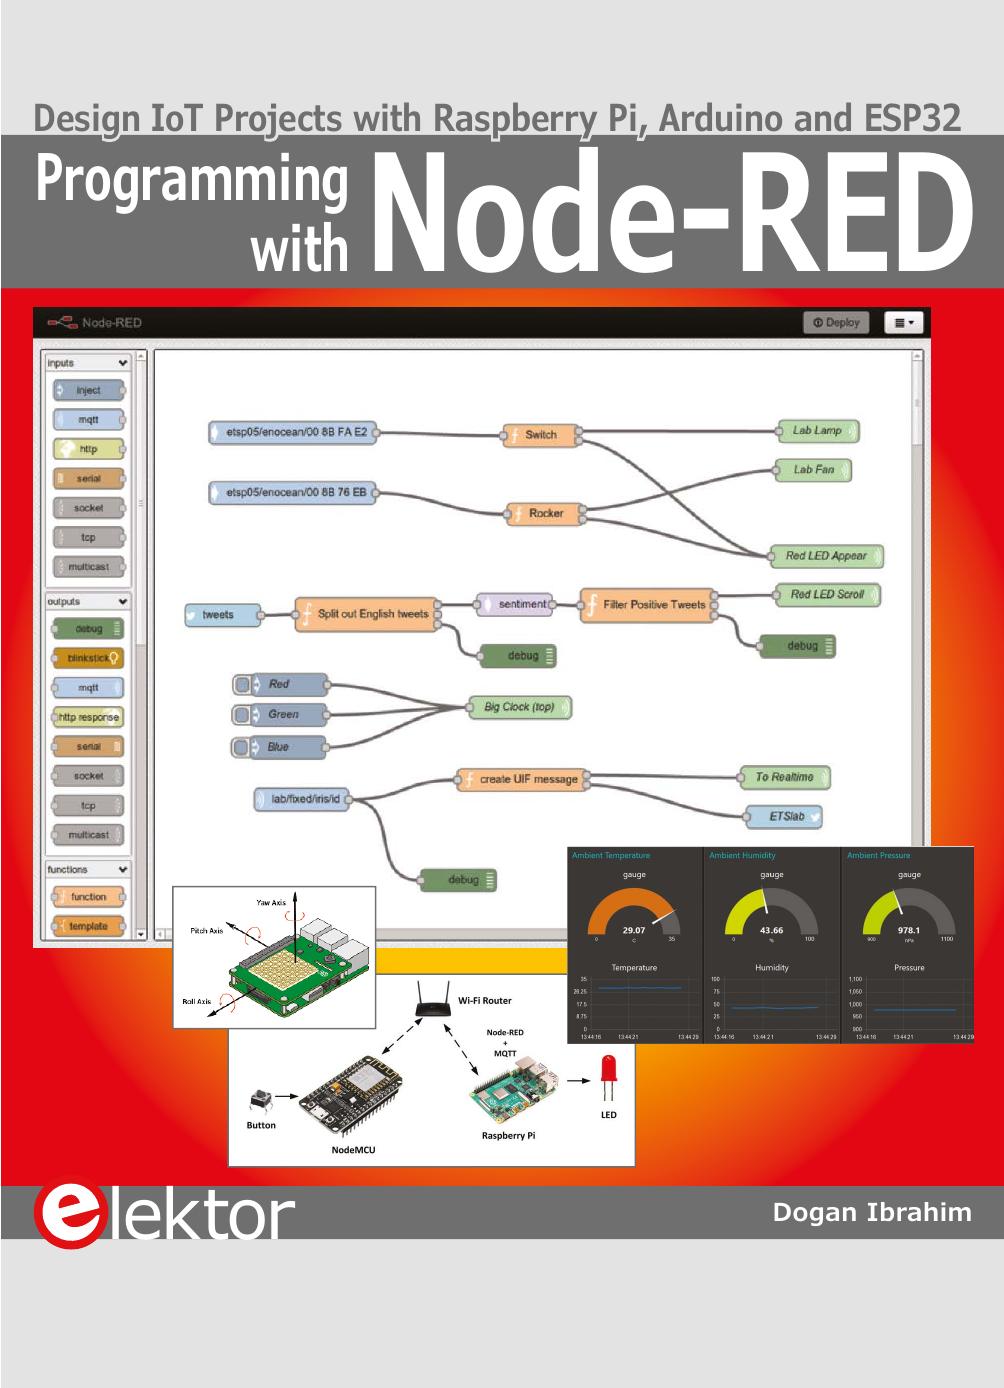 Programming with Node-RED by Dogan Ibrahim